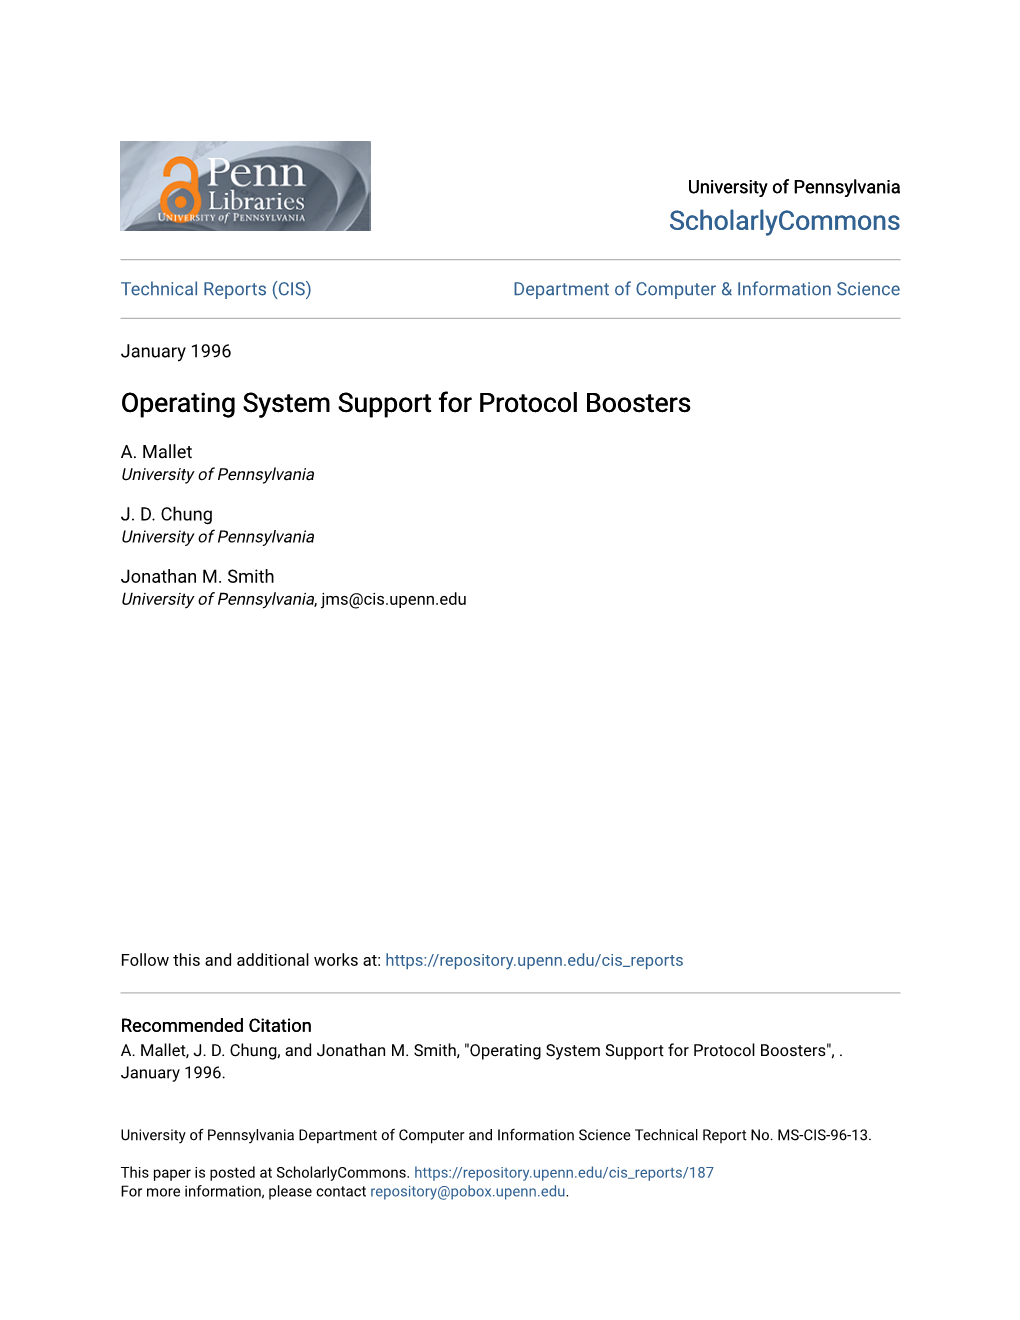 Operating System Support for Protocol Boosters